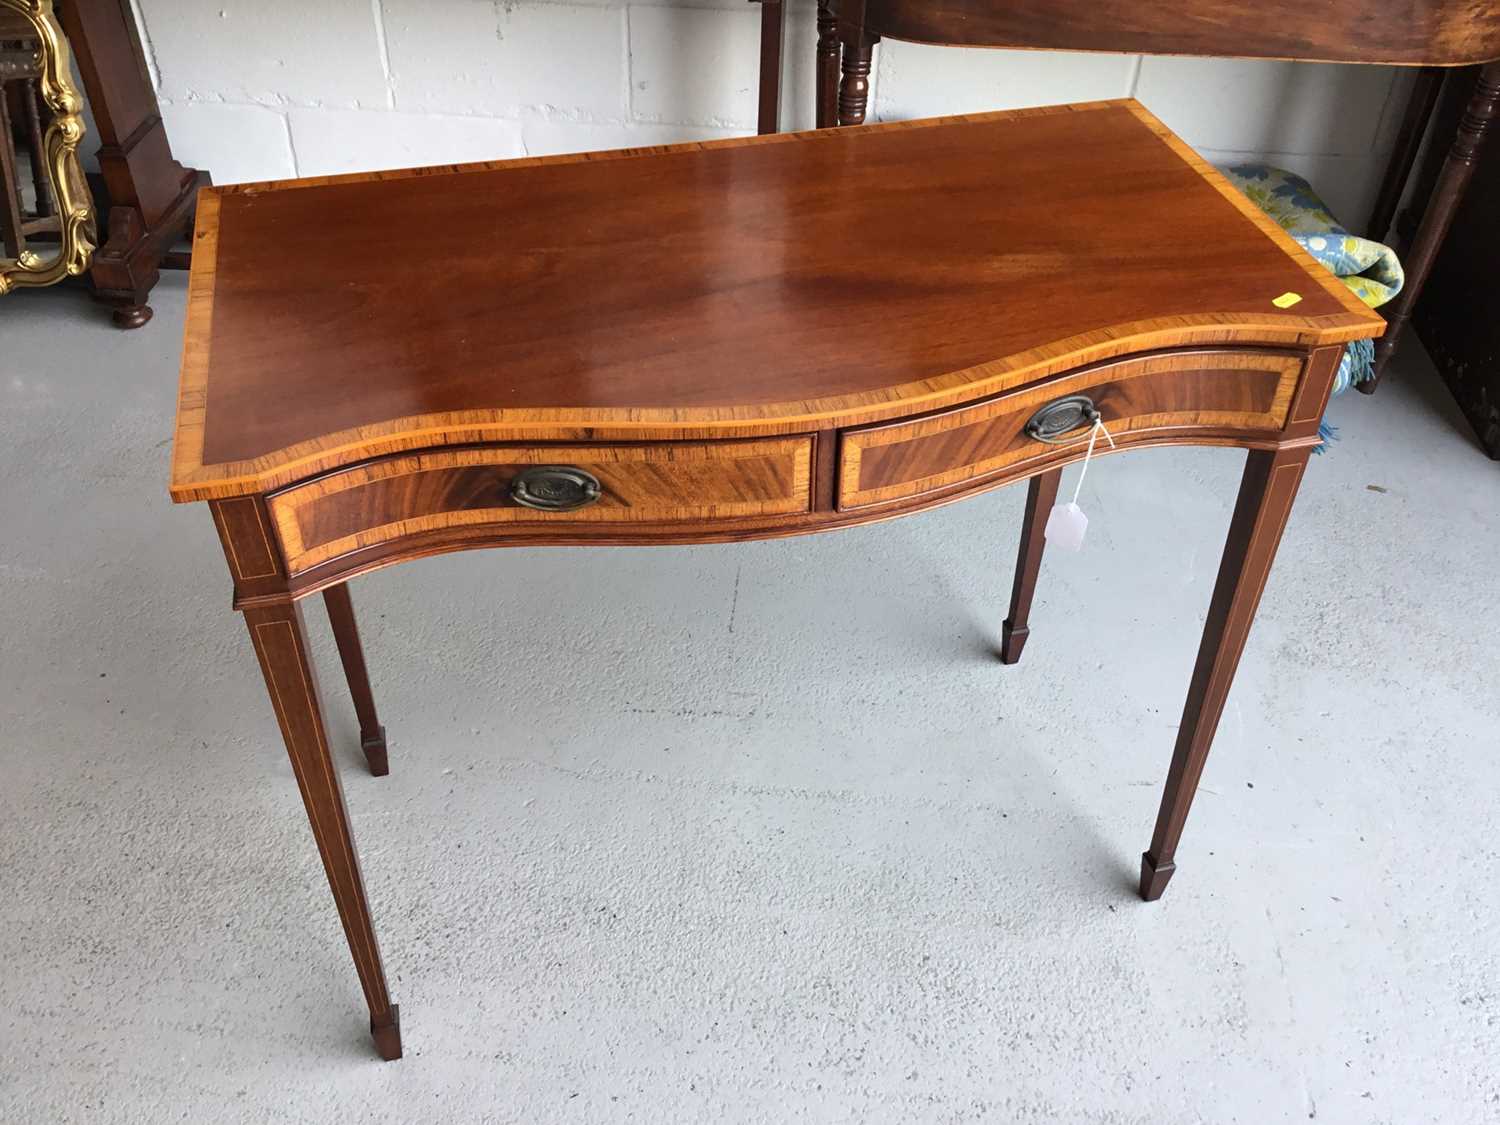 Lot 57 - Good Qualty reproduction mahogany serpentine fronted side table by Redman & Hales, with inlaid and crossbanded decoration ,and two drawers, on square taper legs, 89cm in length, 76cm in height, 45c...